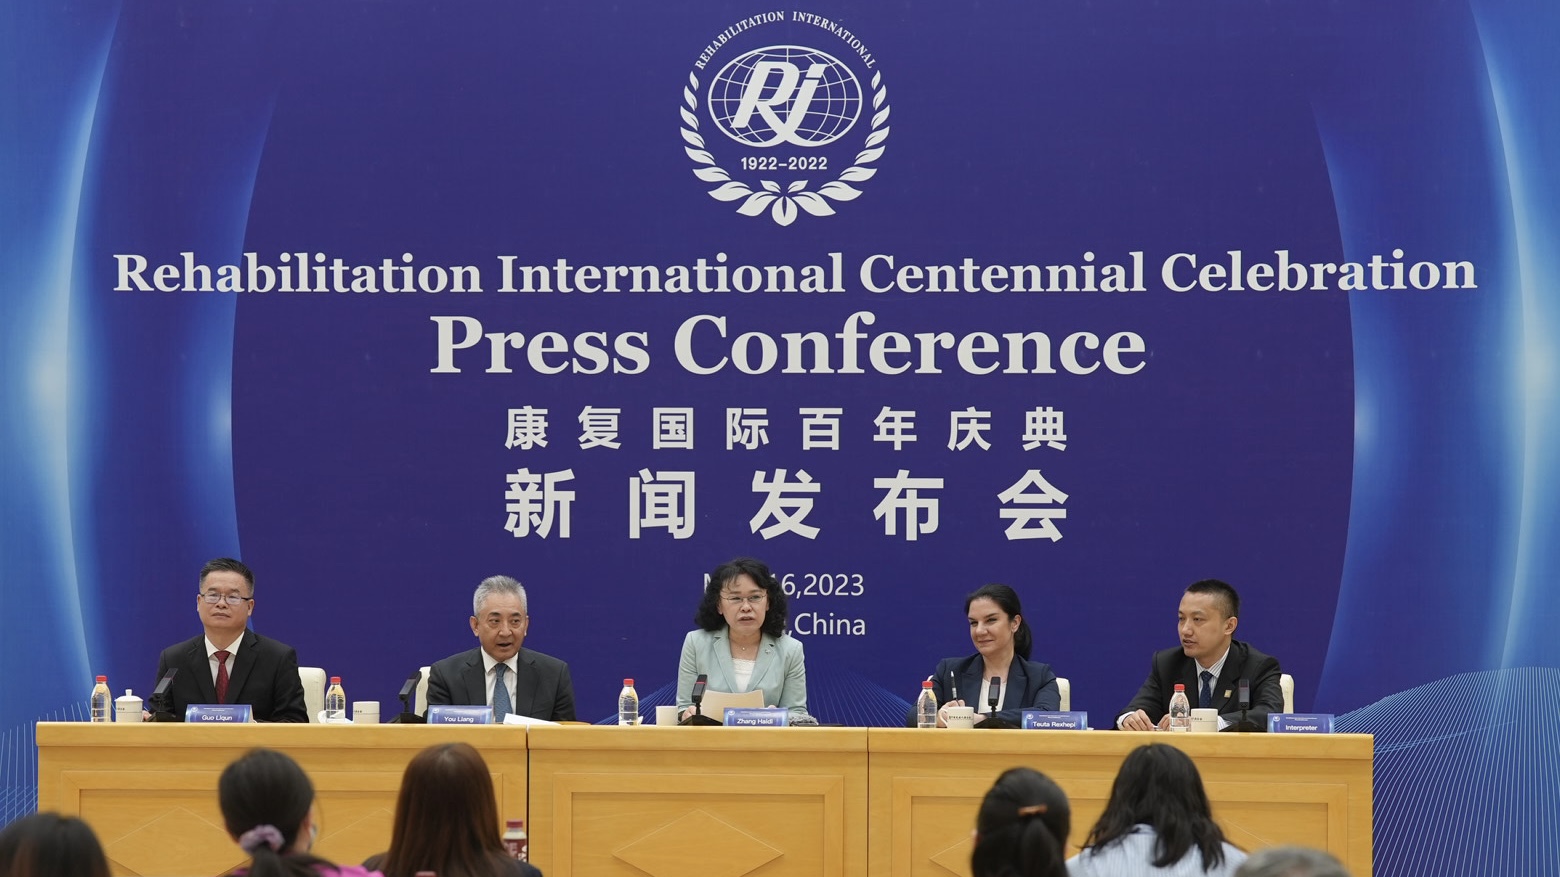 Zhang Haidi (C), chairperson of RI, speaks at a press conference in Beijing, China, May 16, 2023. /CGTN